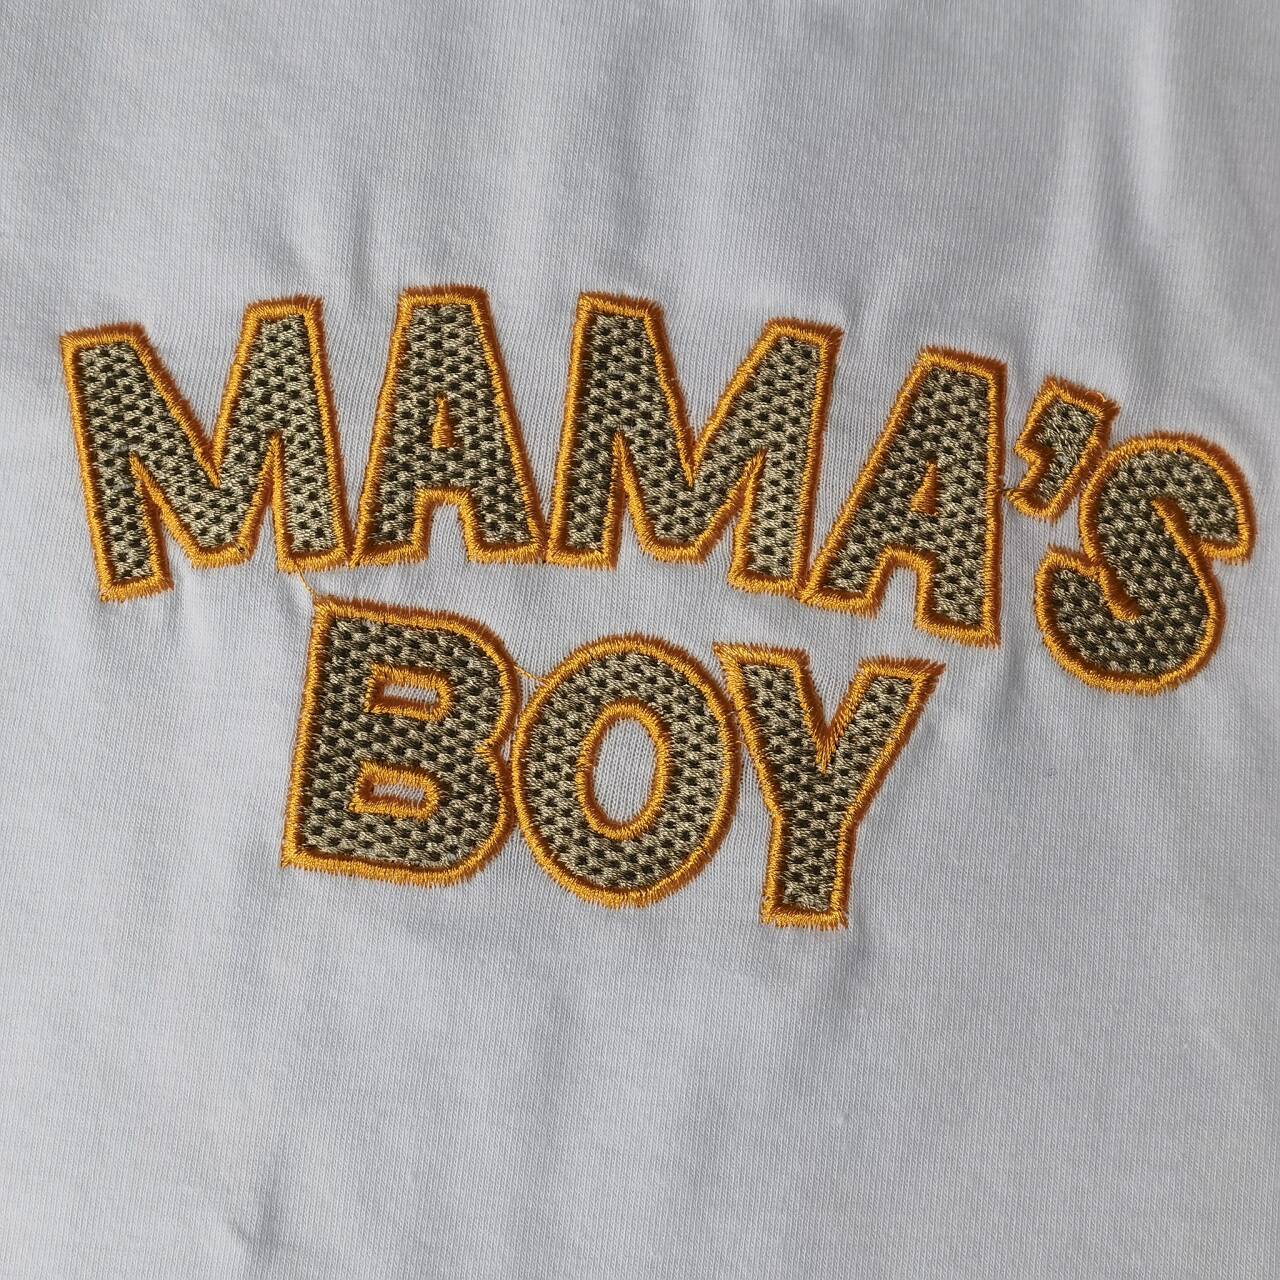 cotton mama's boy jogger outfit boys clothing